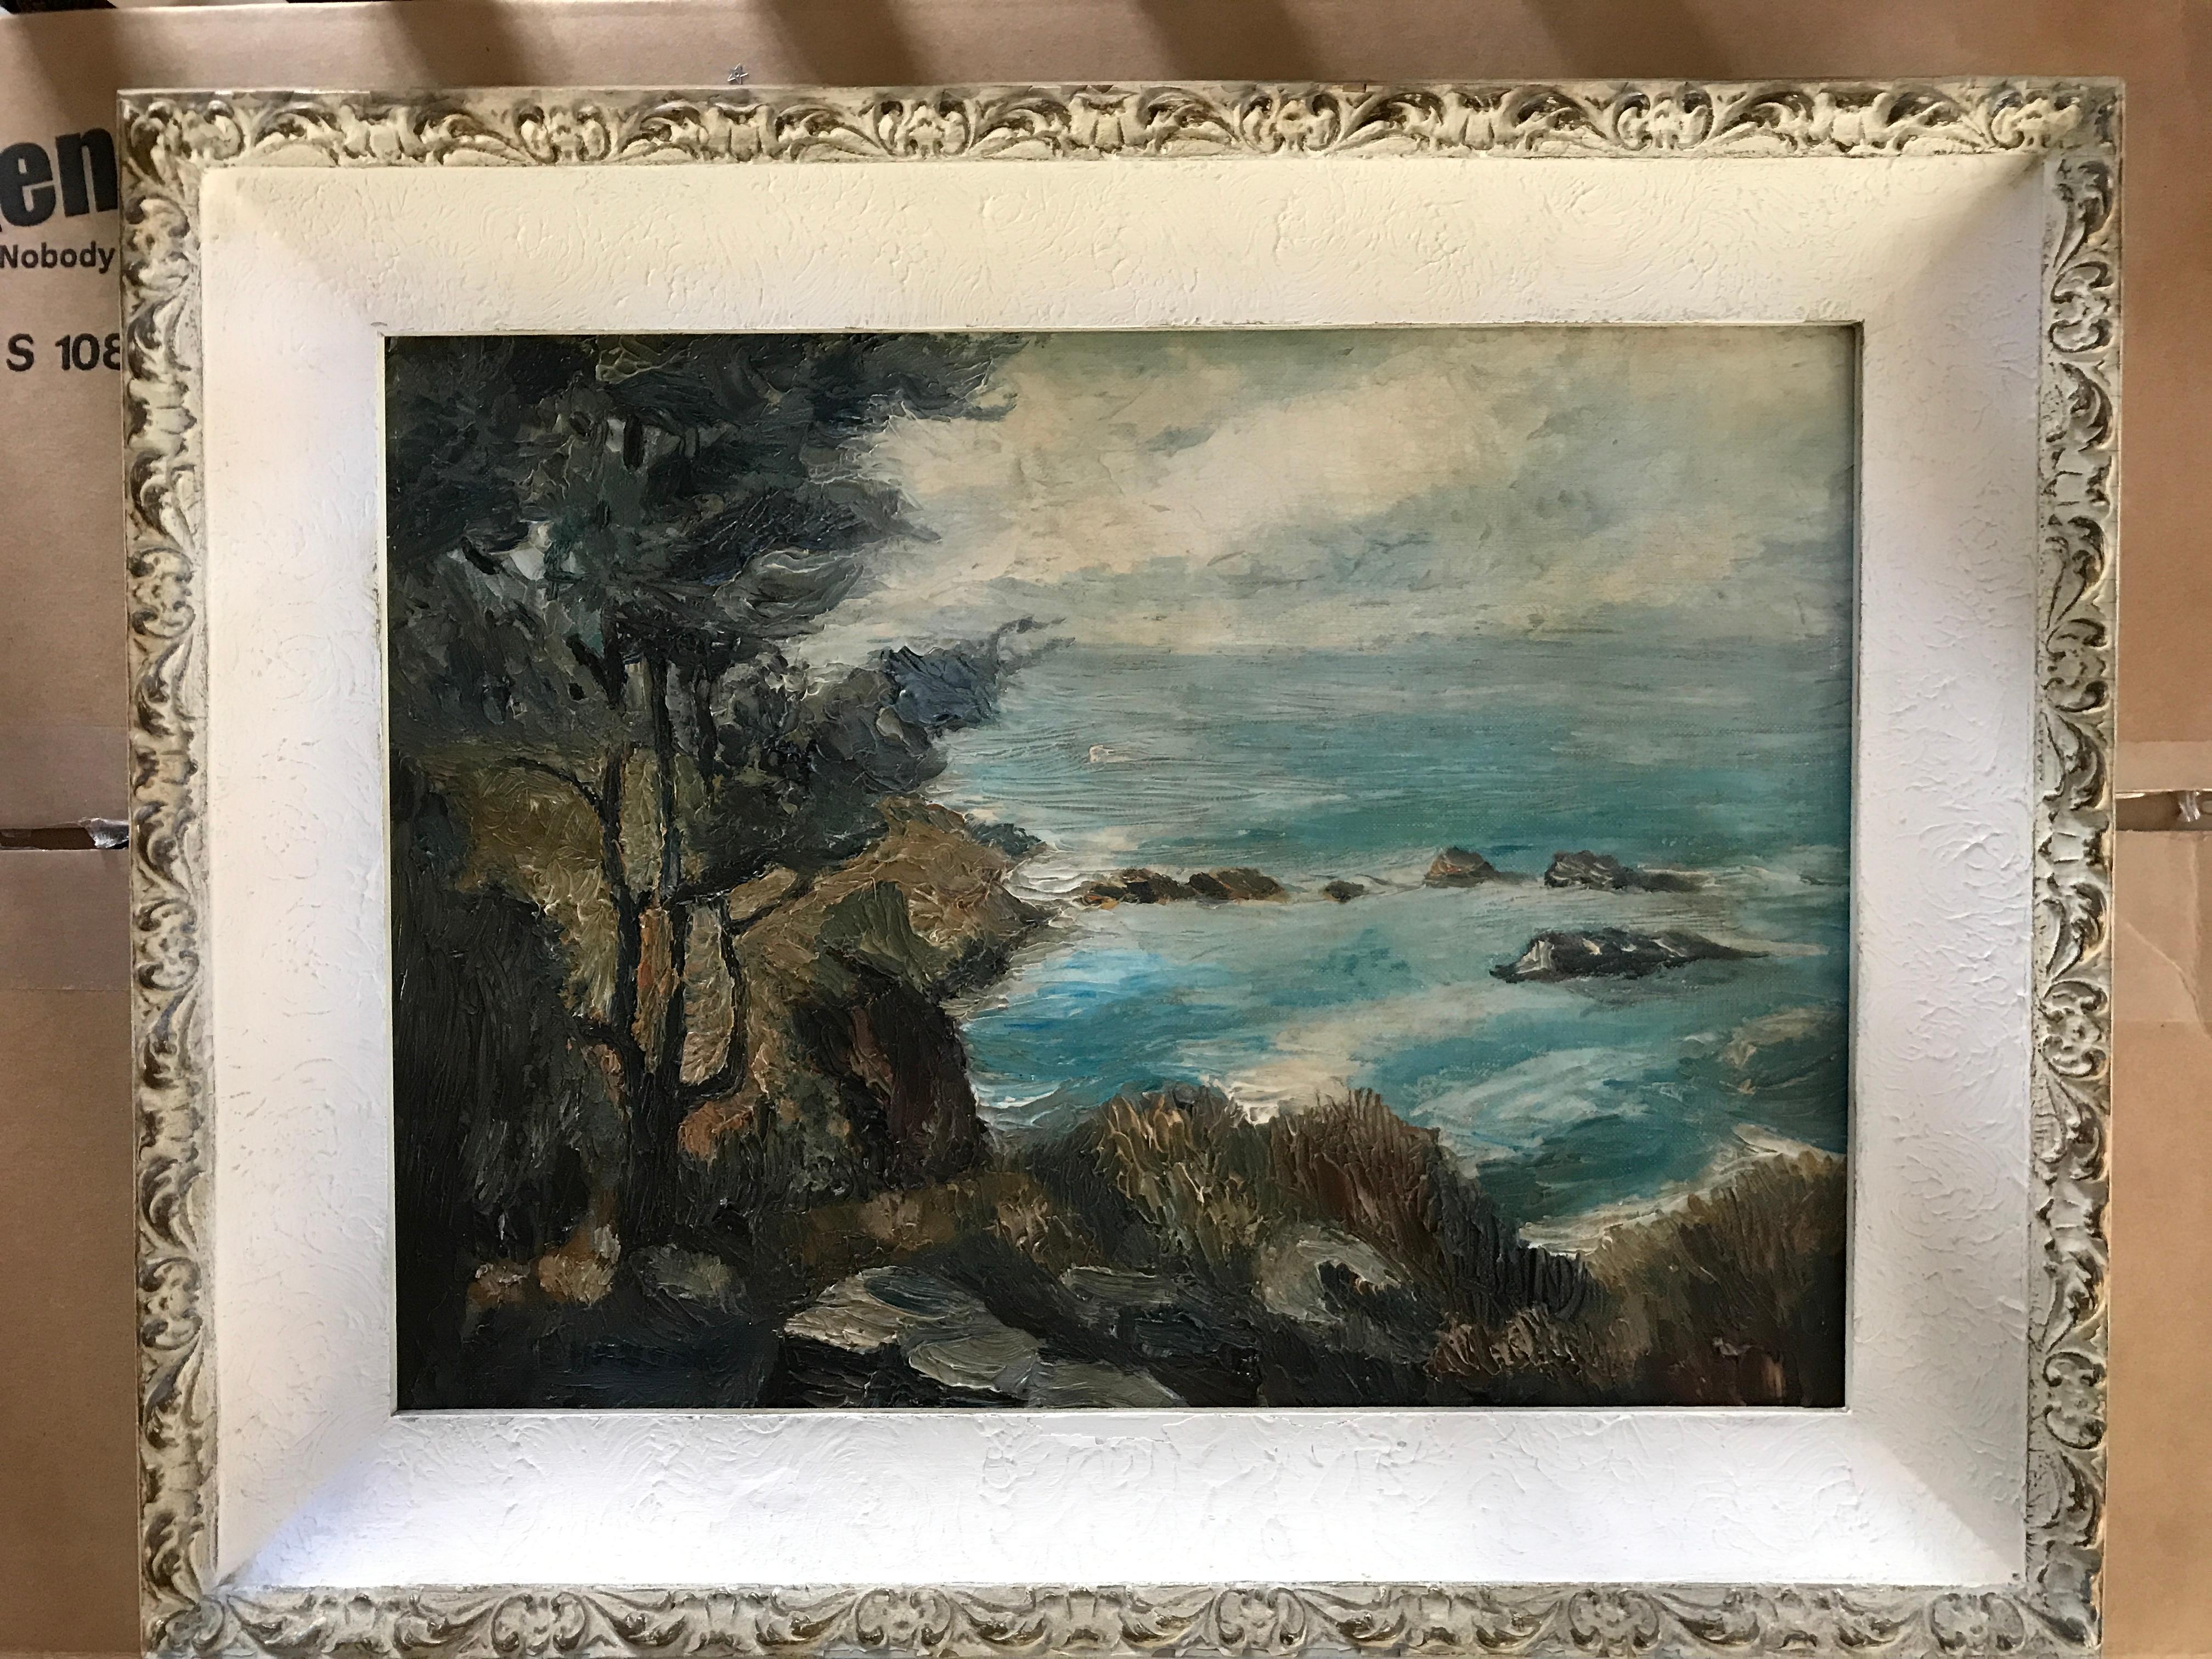 Ejnar Hansen, (1884-1965), “Californian Coastline”, oil on board. Measurement with frame: 16 X 20 inches.
Ejnar Hansen was a notable figure painter in Southern California. He began his career in Copenhagen, where he studied at the Royal Academy of